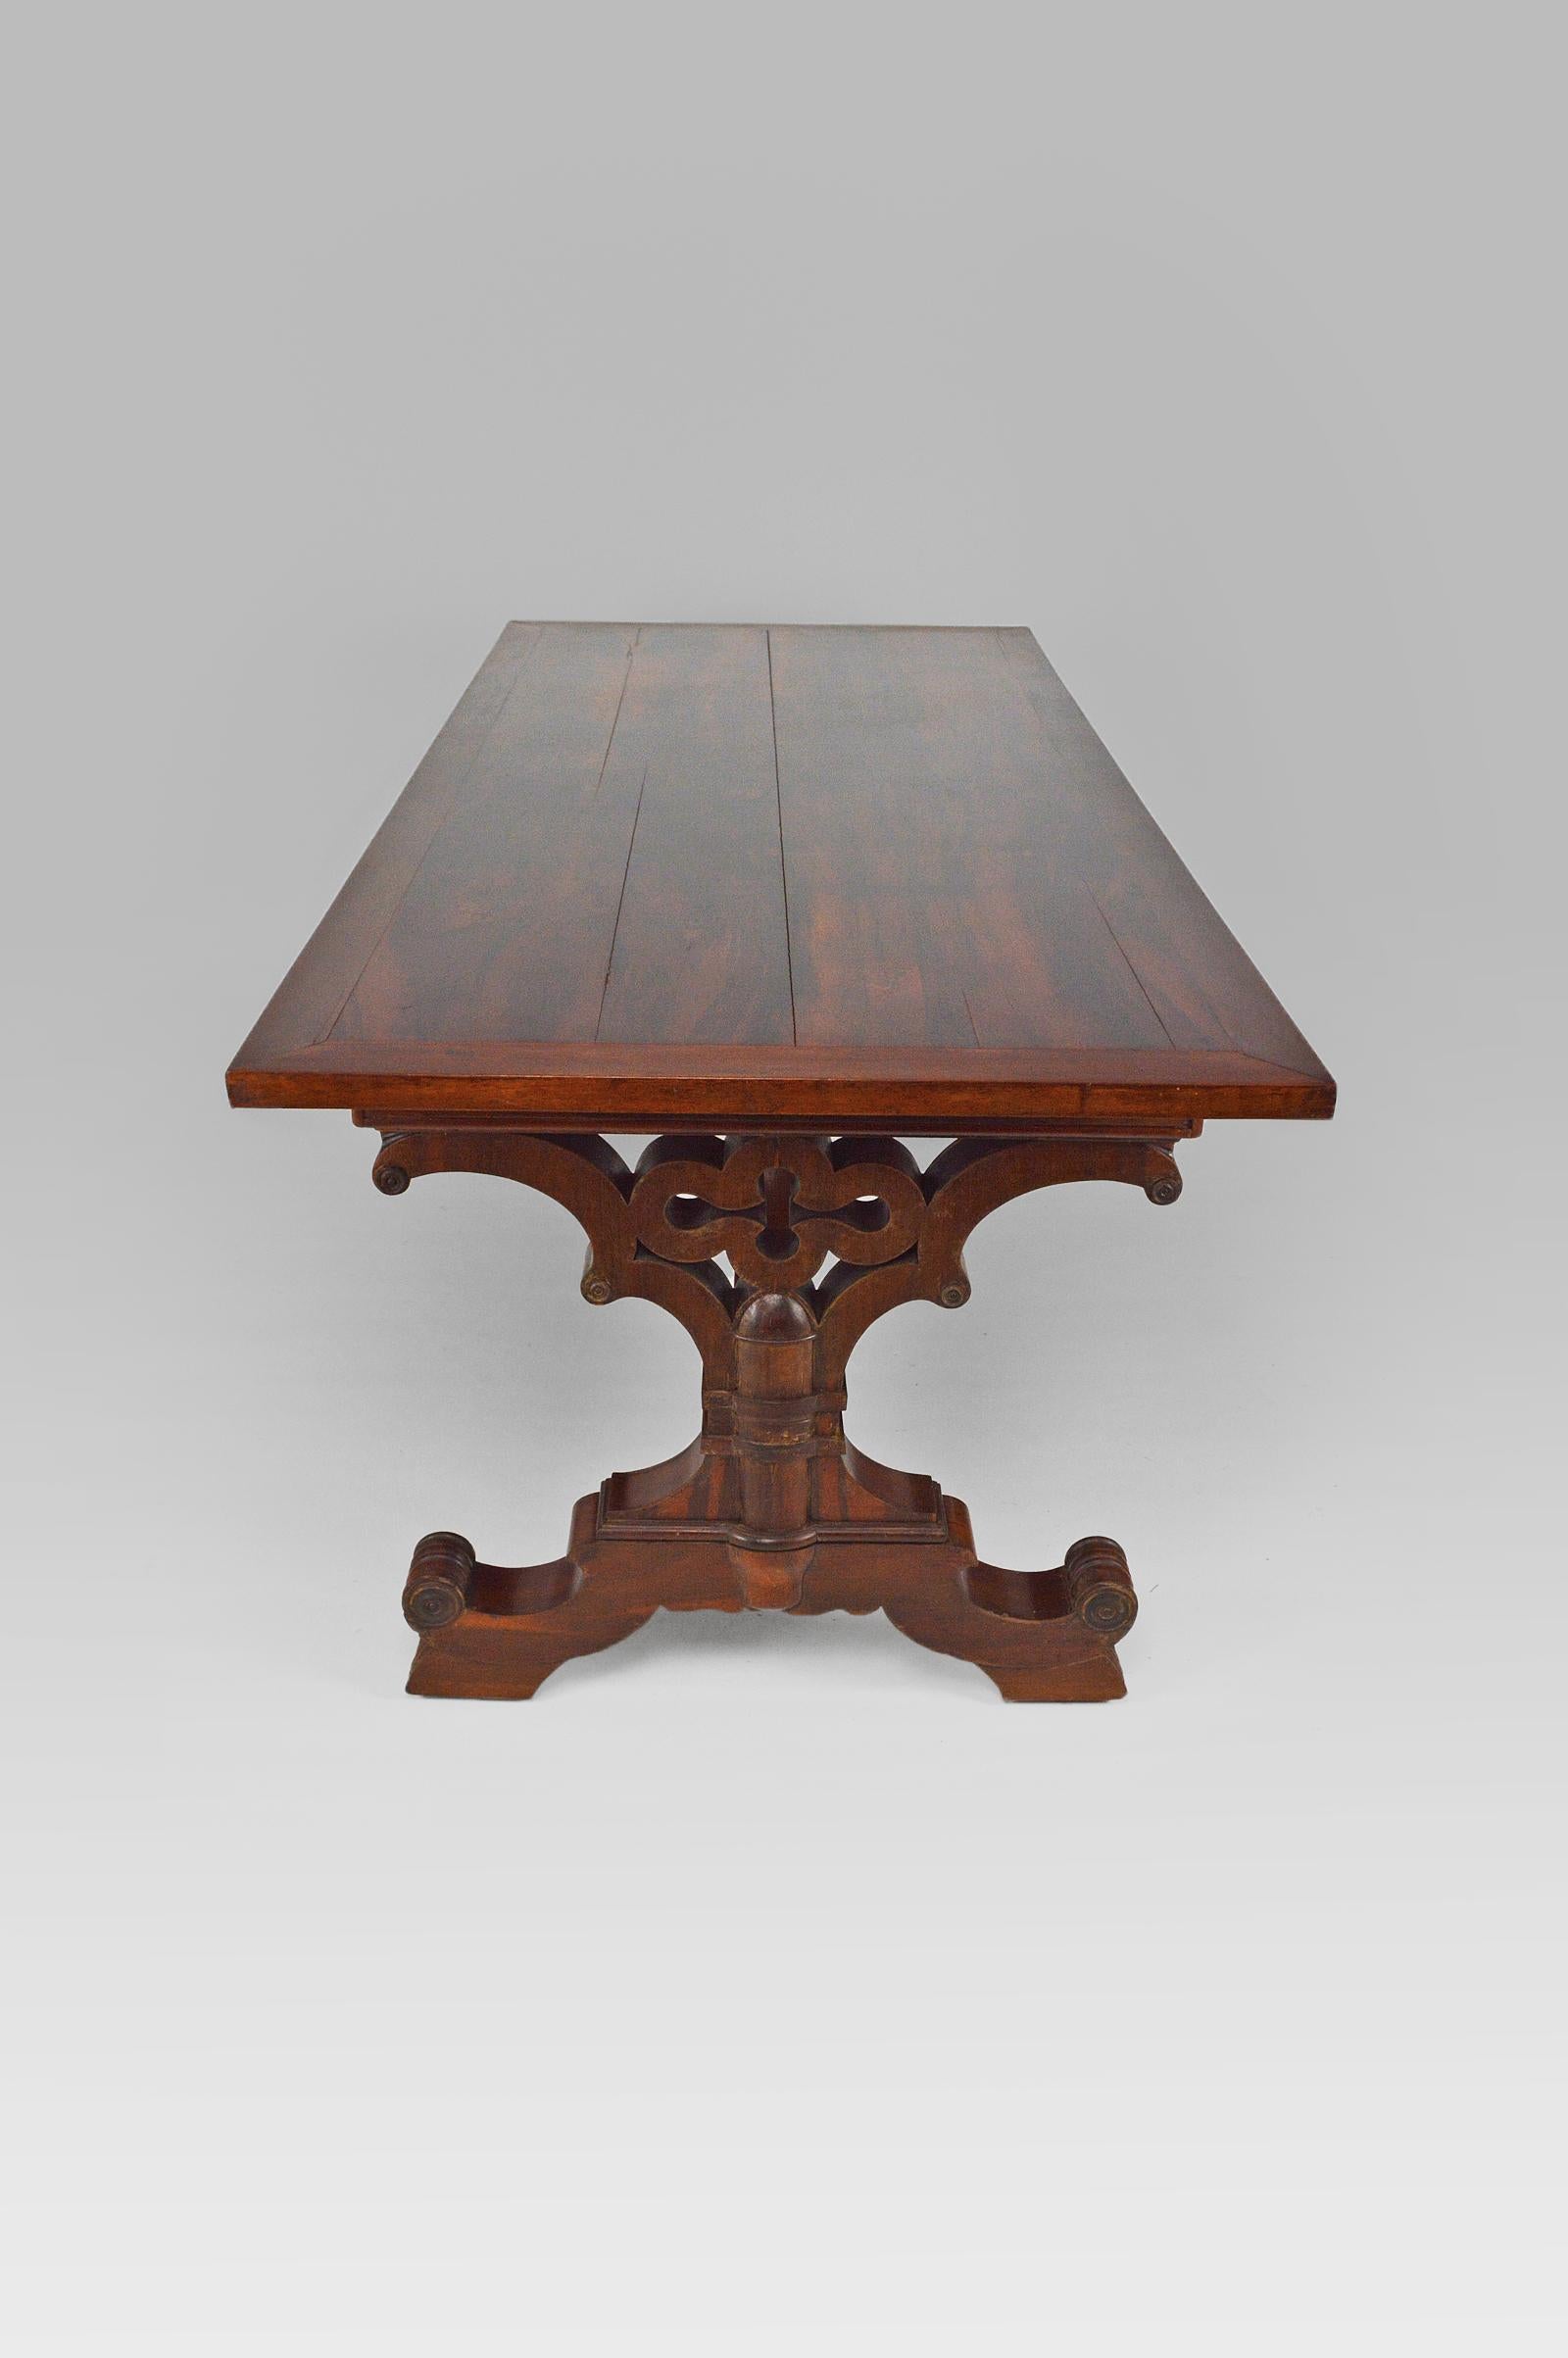 Gothic Revival Dining Table in Mahogany, Victorian Era, circa 1840 For Sale 2